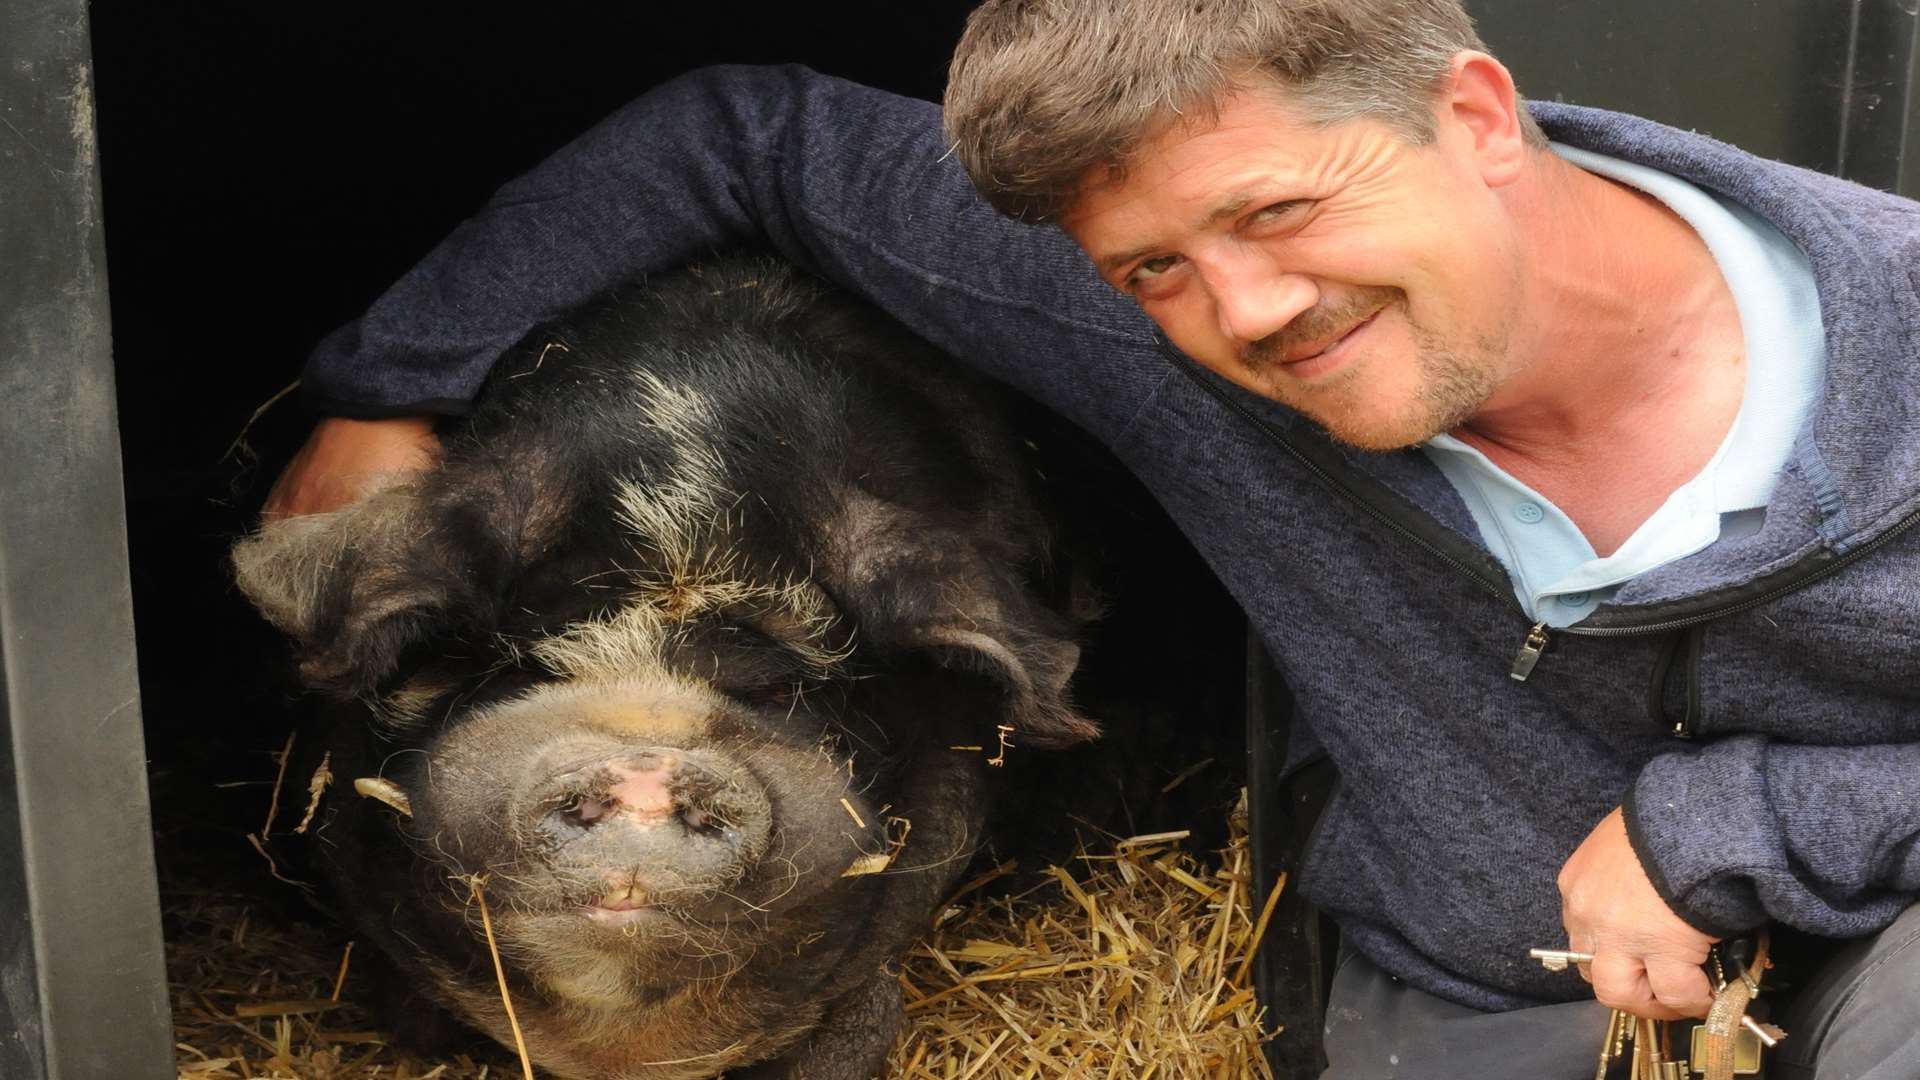 Andy Cowell with Spice the Kune Kune pig